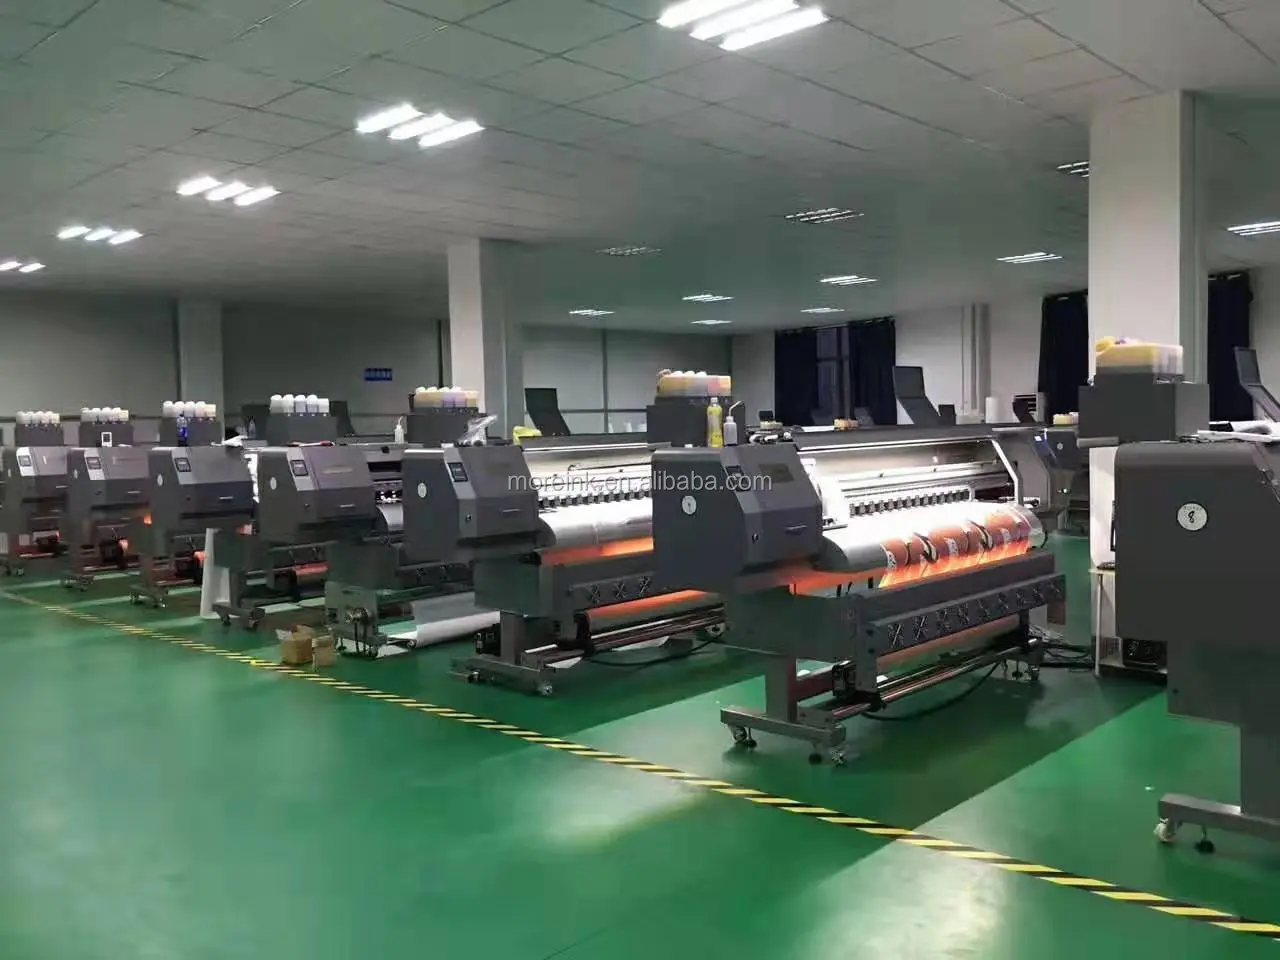 Pengda Heat Transfer Machine Pd-1800df-800 For Sublimation Process ...